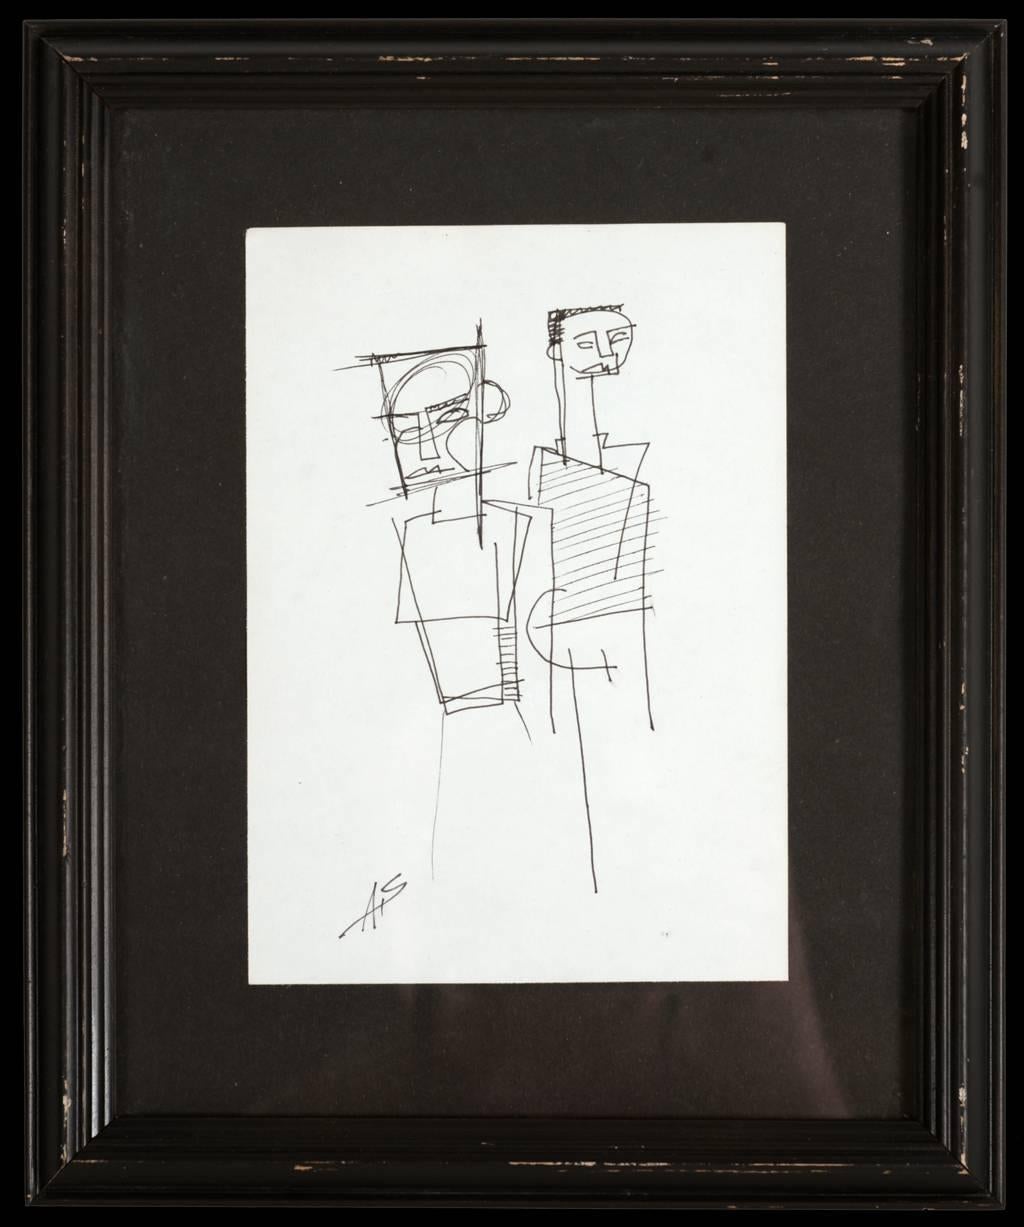 Collection of framed pen and ink line drawings by unknown Massachusetts artist framed in wooden black frames. Four of the drawings are 9.5